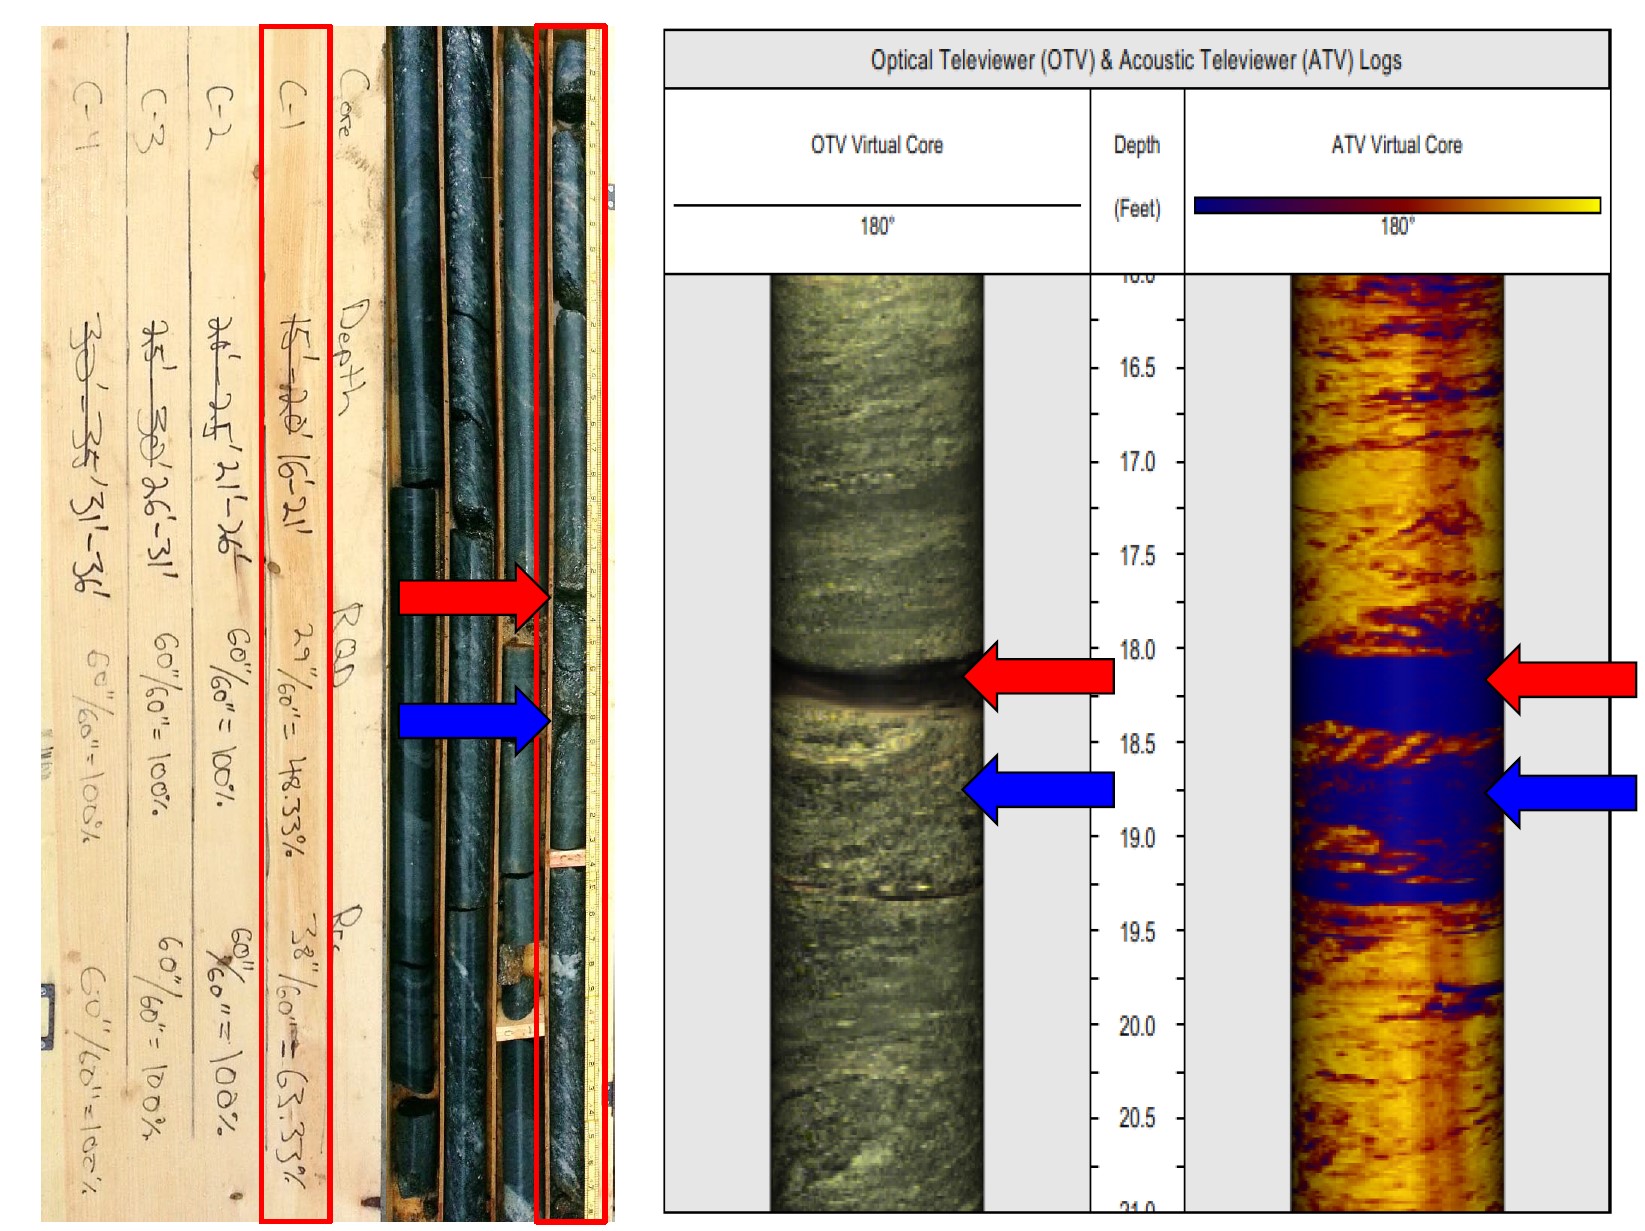 Diagram showing comparison of reconstructed fracture data from borehole television, and a detailed core log, with a copy of an acoustic televiewer log.